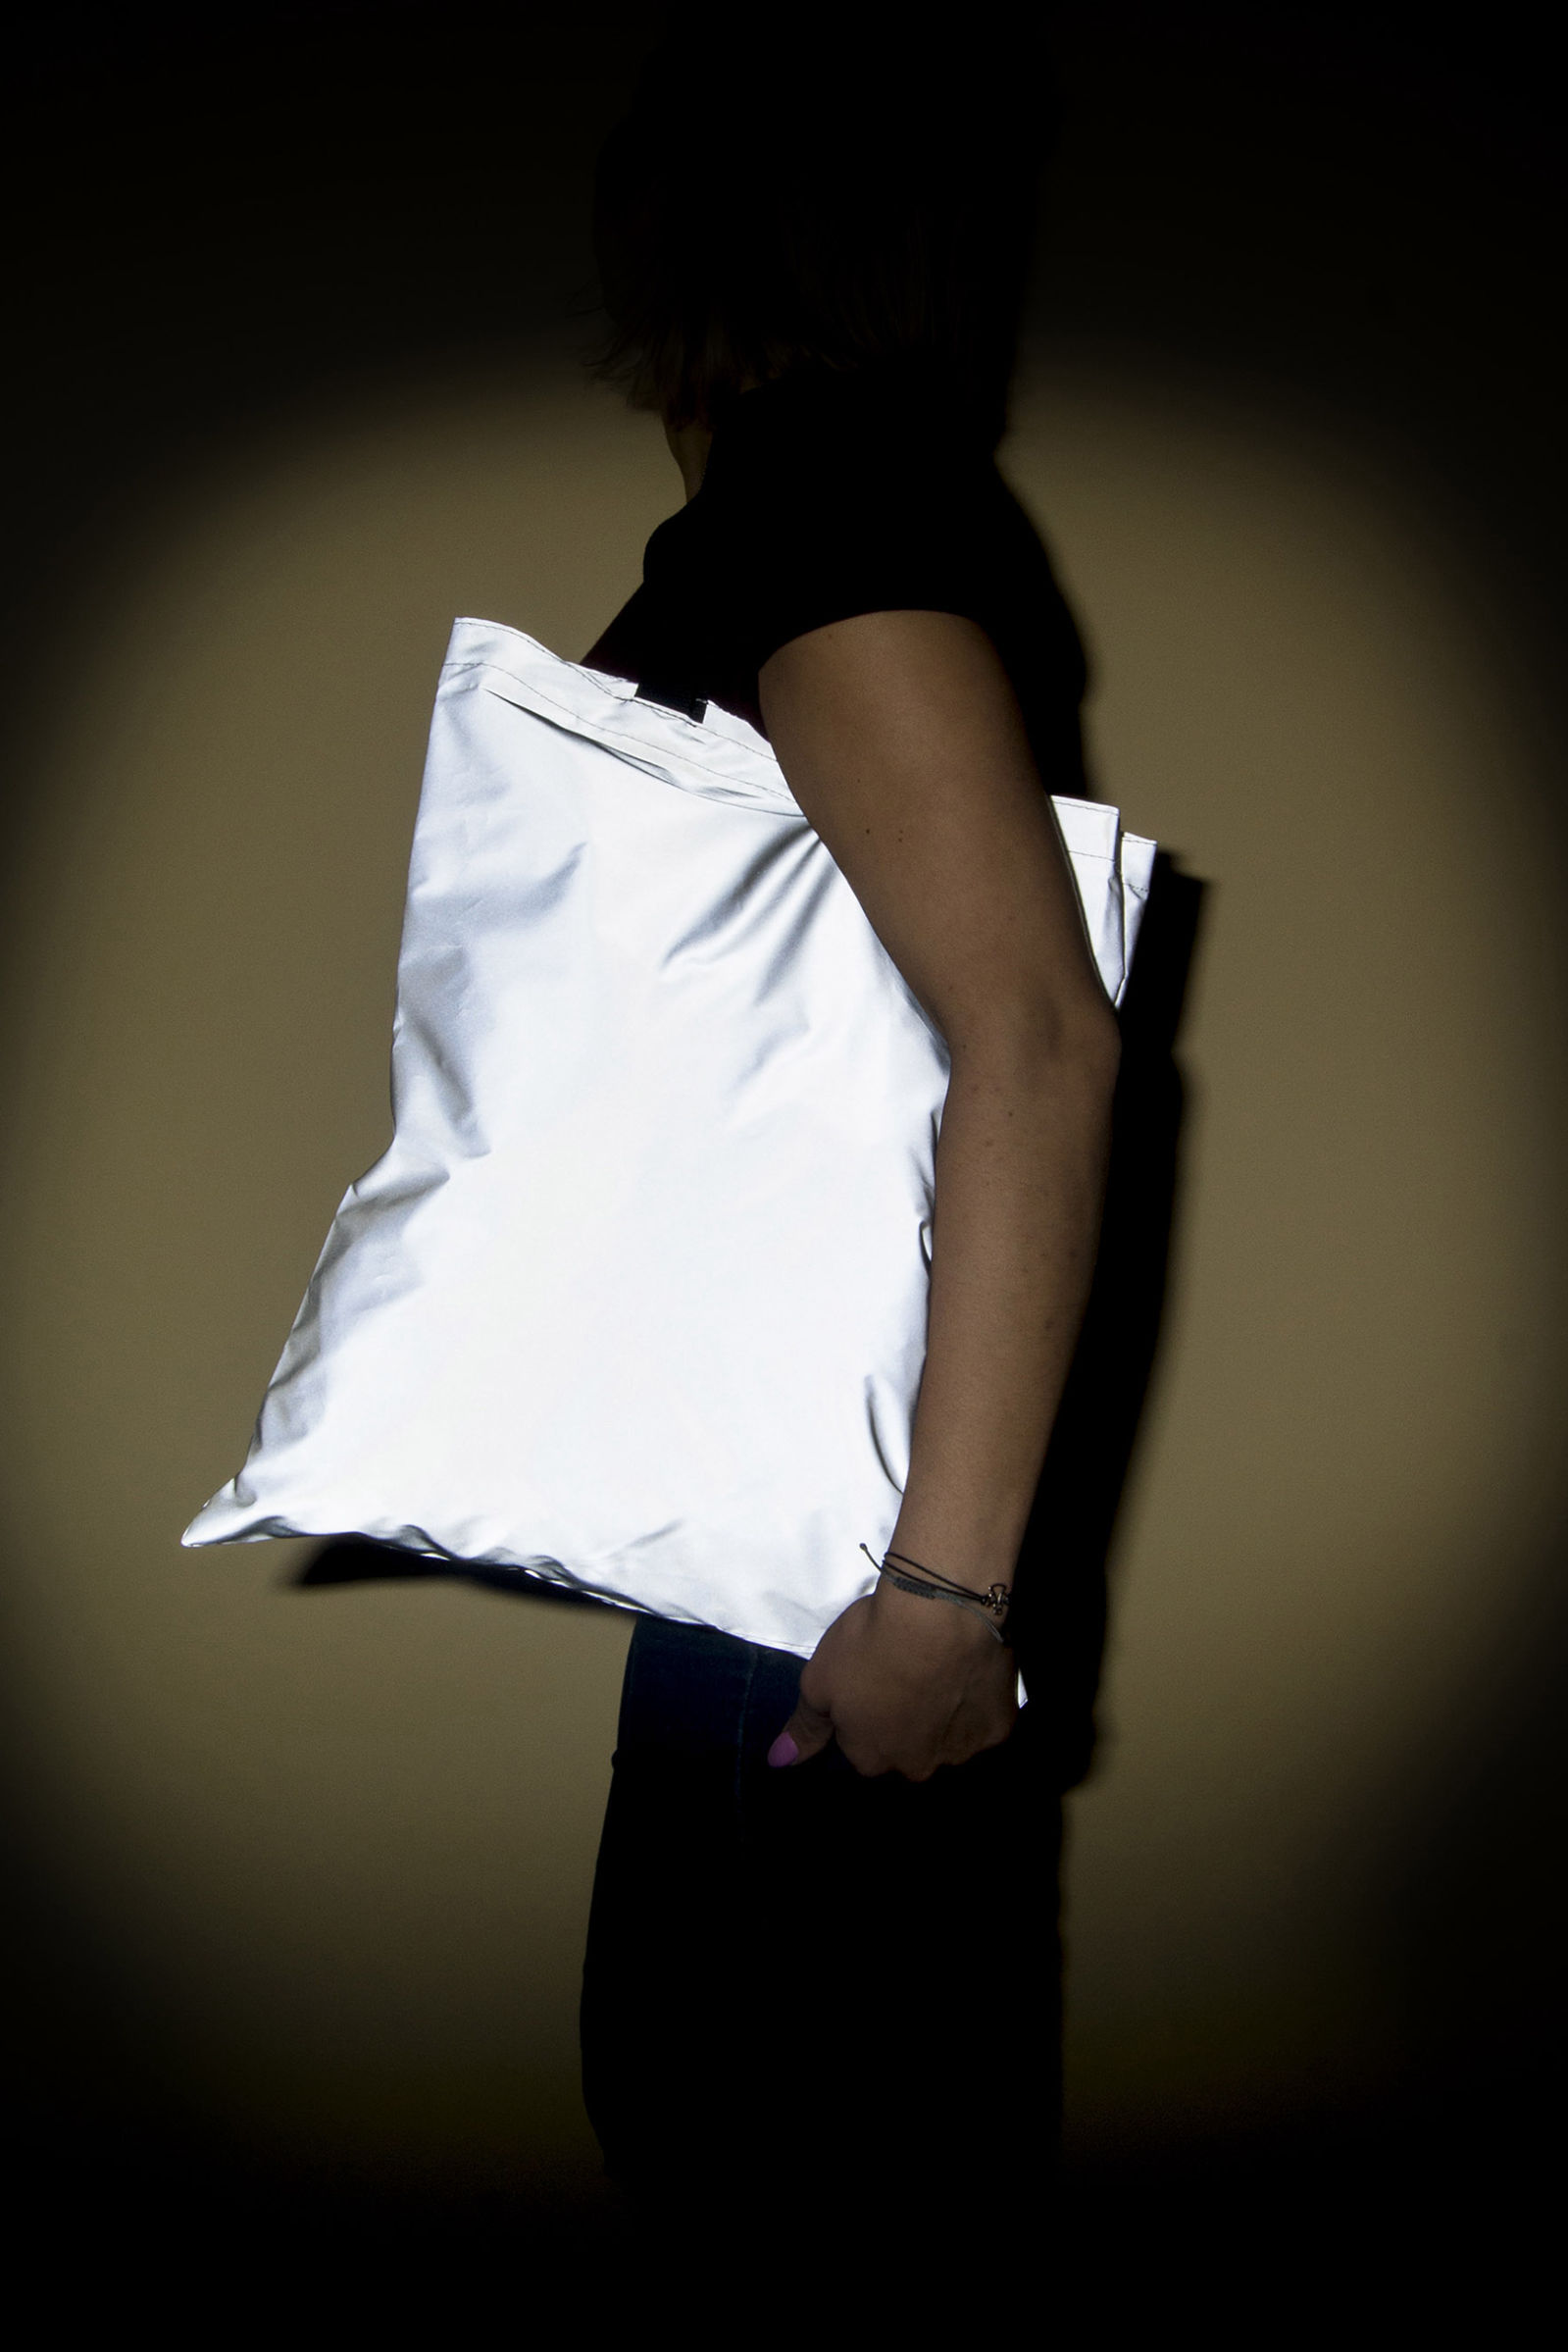 Be safe with reflective shopping bag